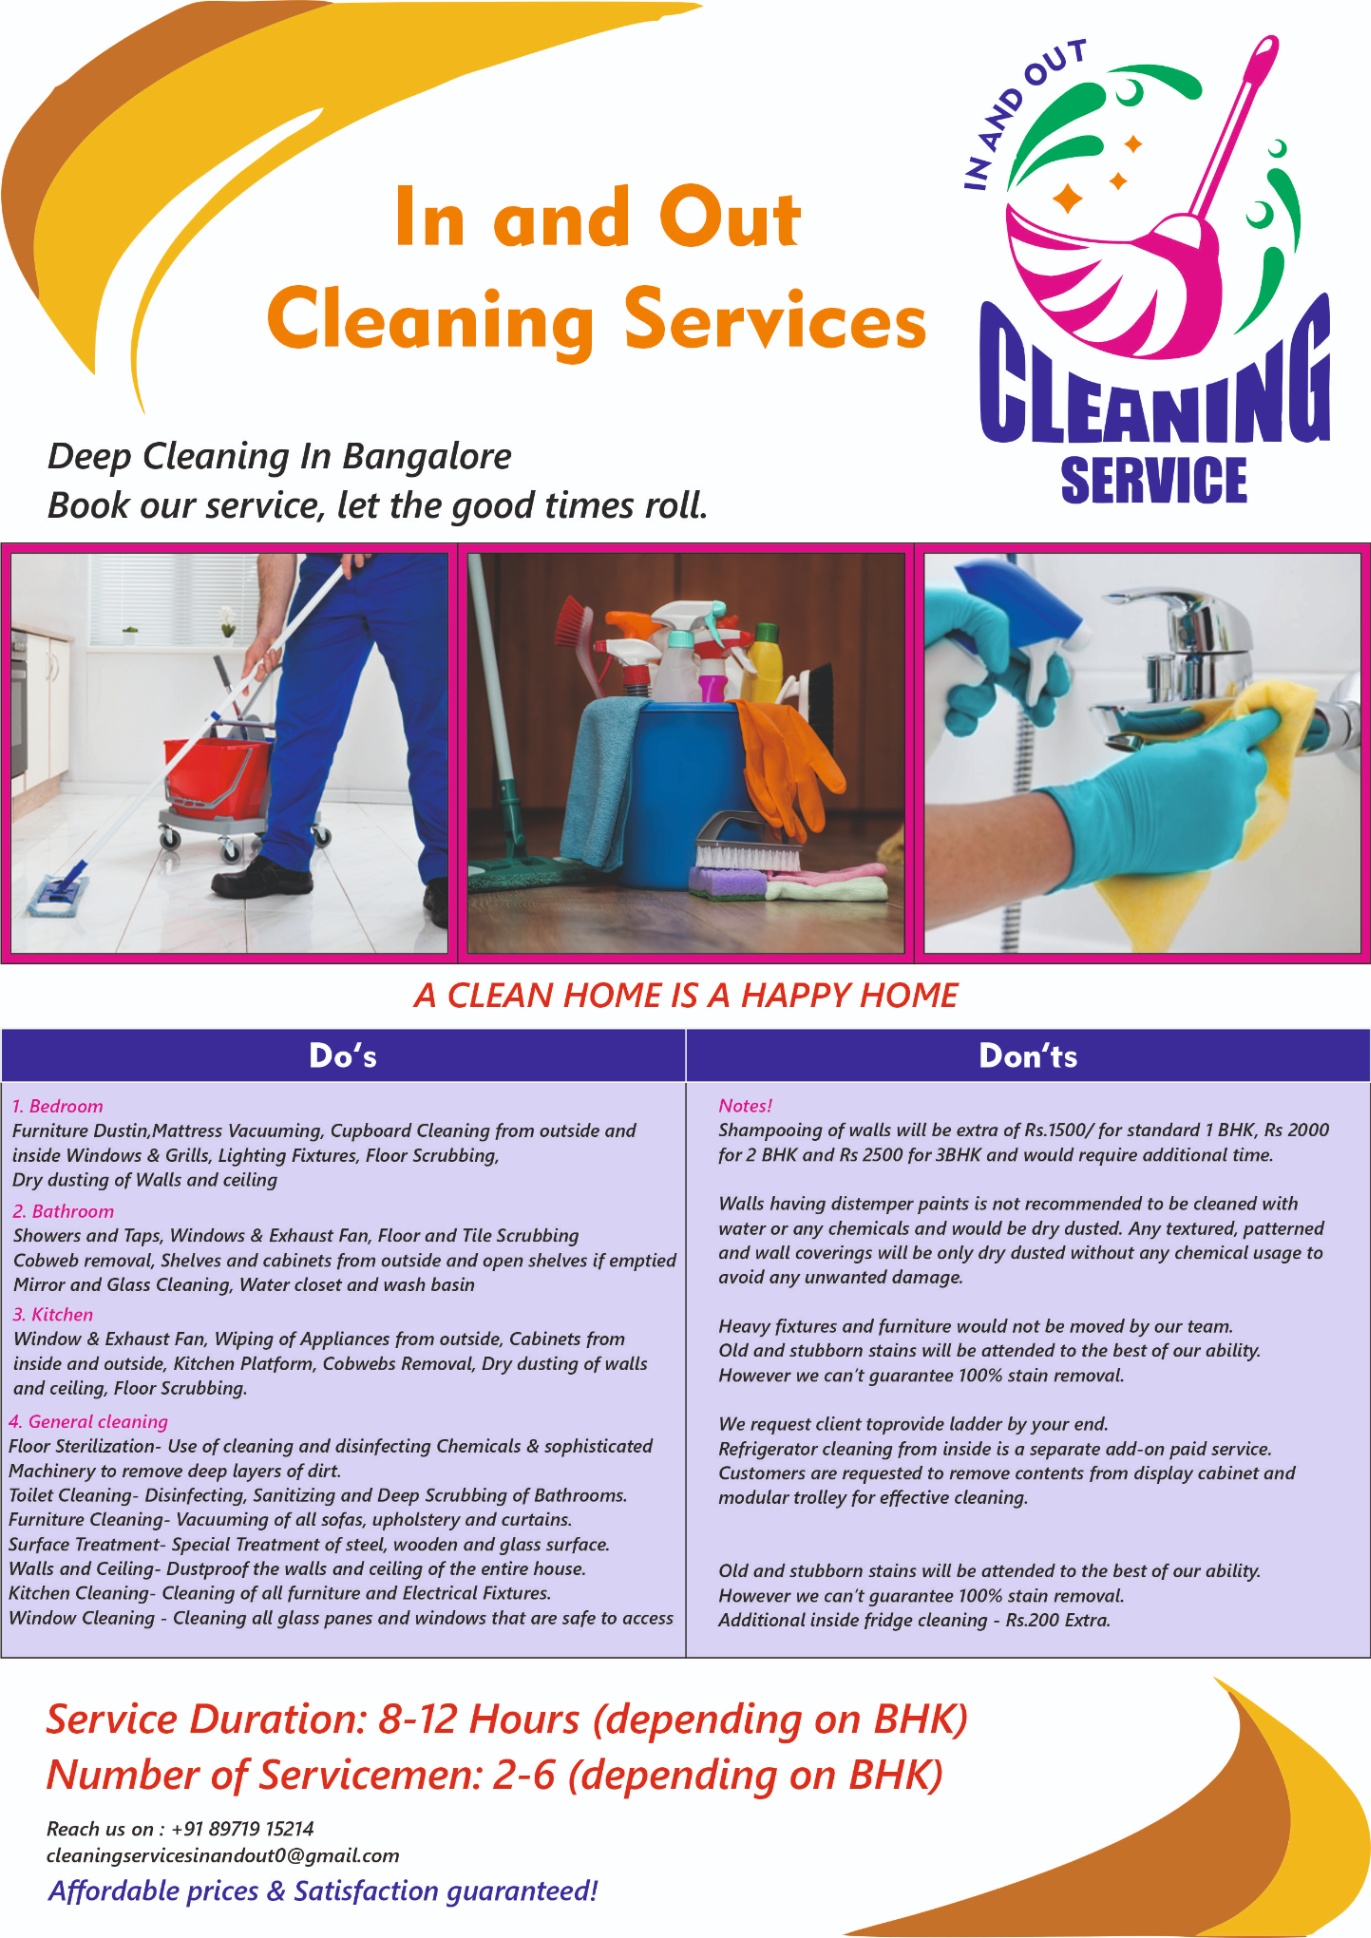 Other domestic services; Exp: More than 5 year